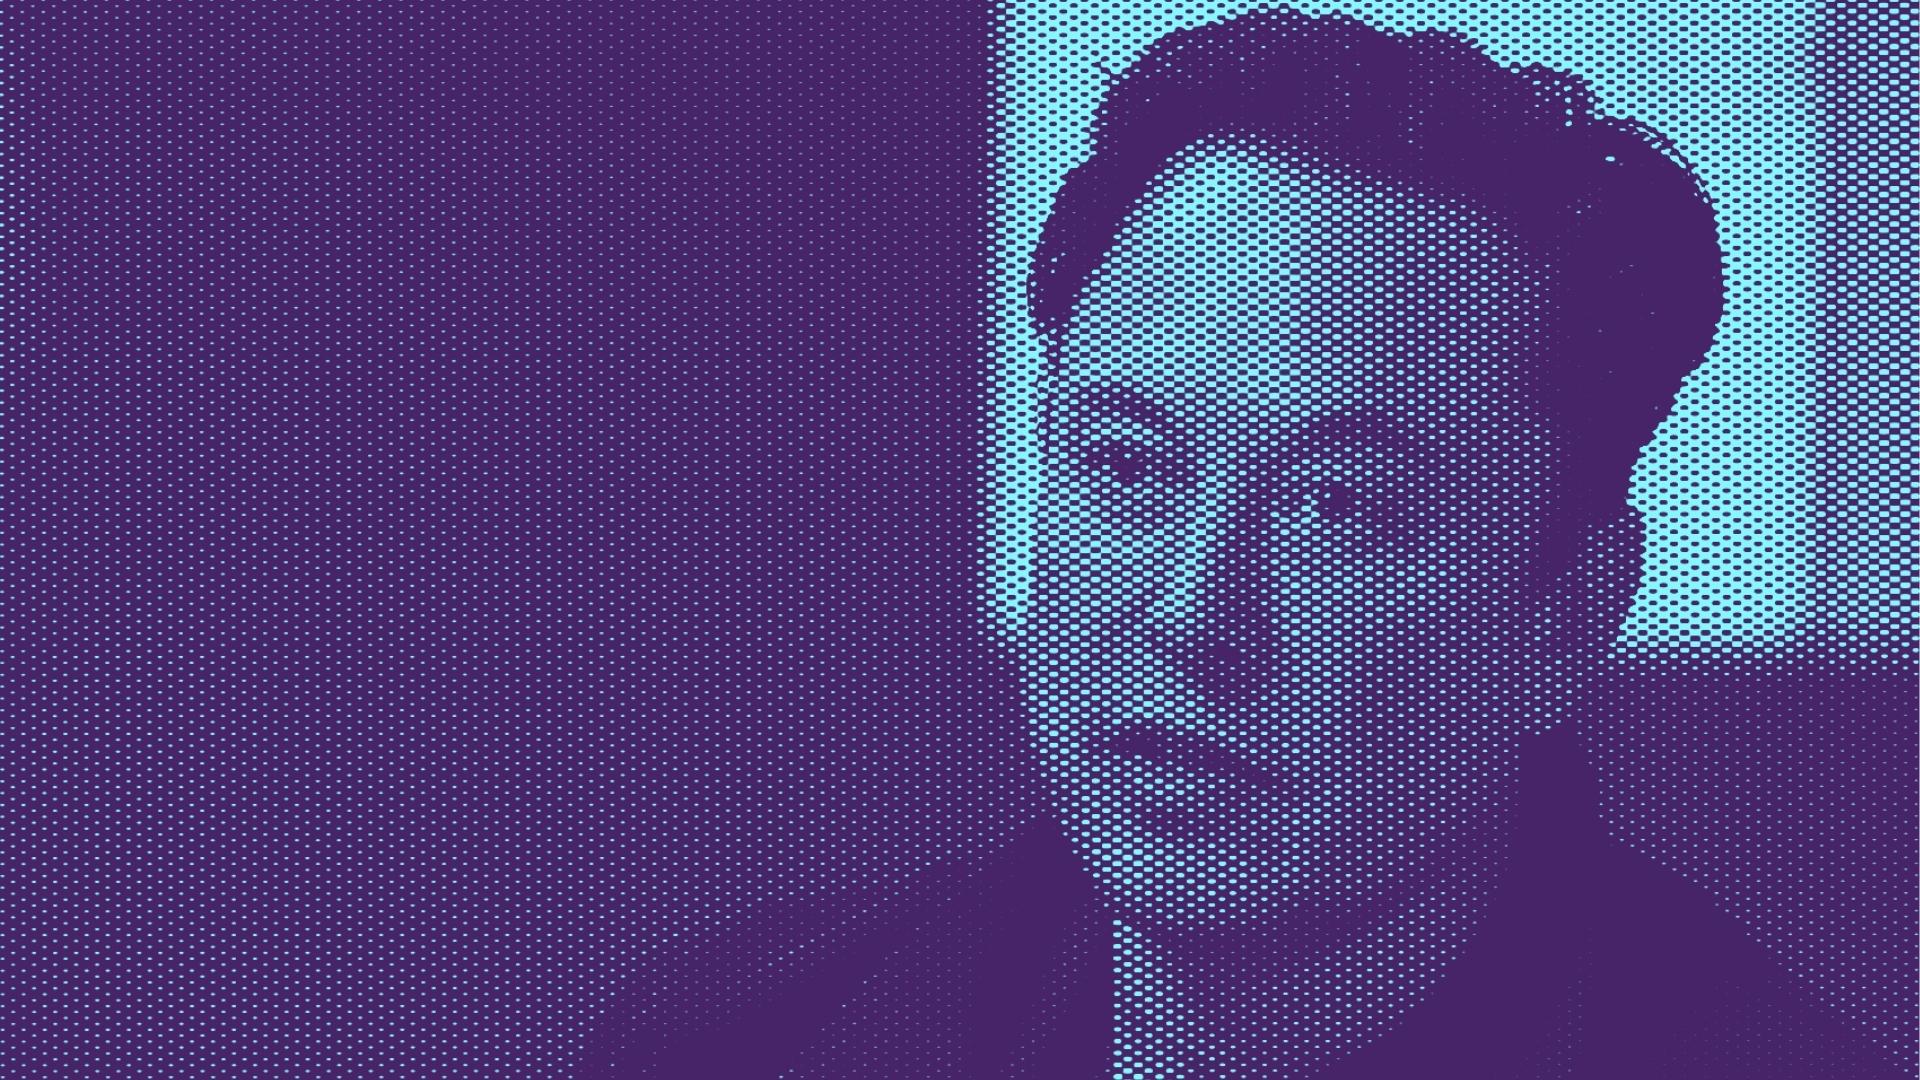 Elon Musk's Remote Working: Return or Quit

